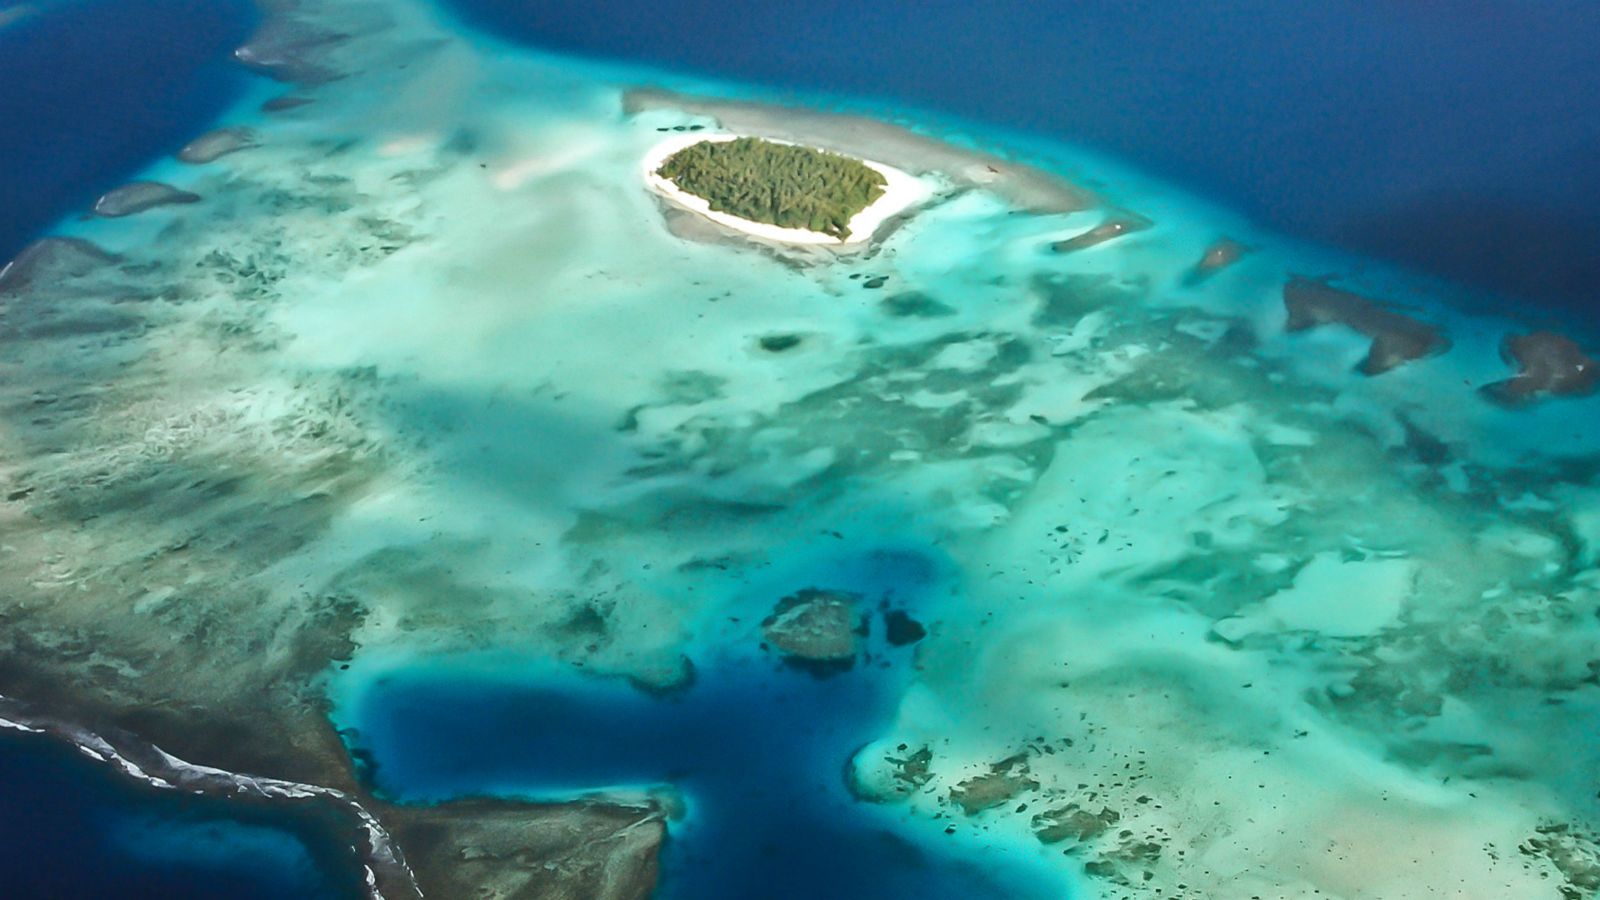 An image of an island with a reef and surrounded by ocean, taken from above